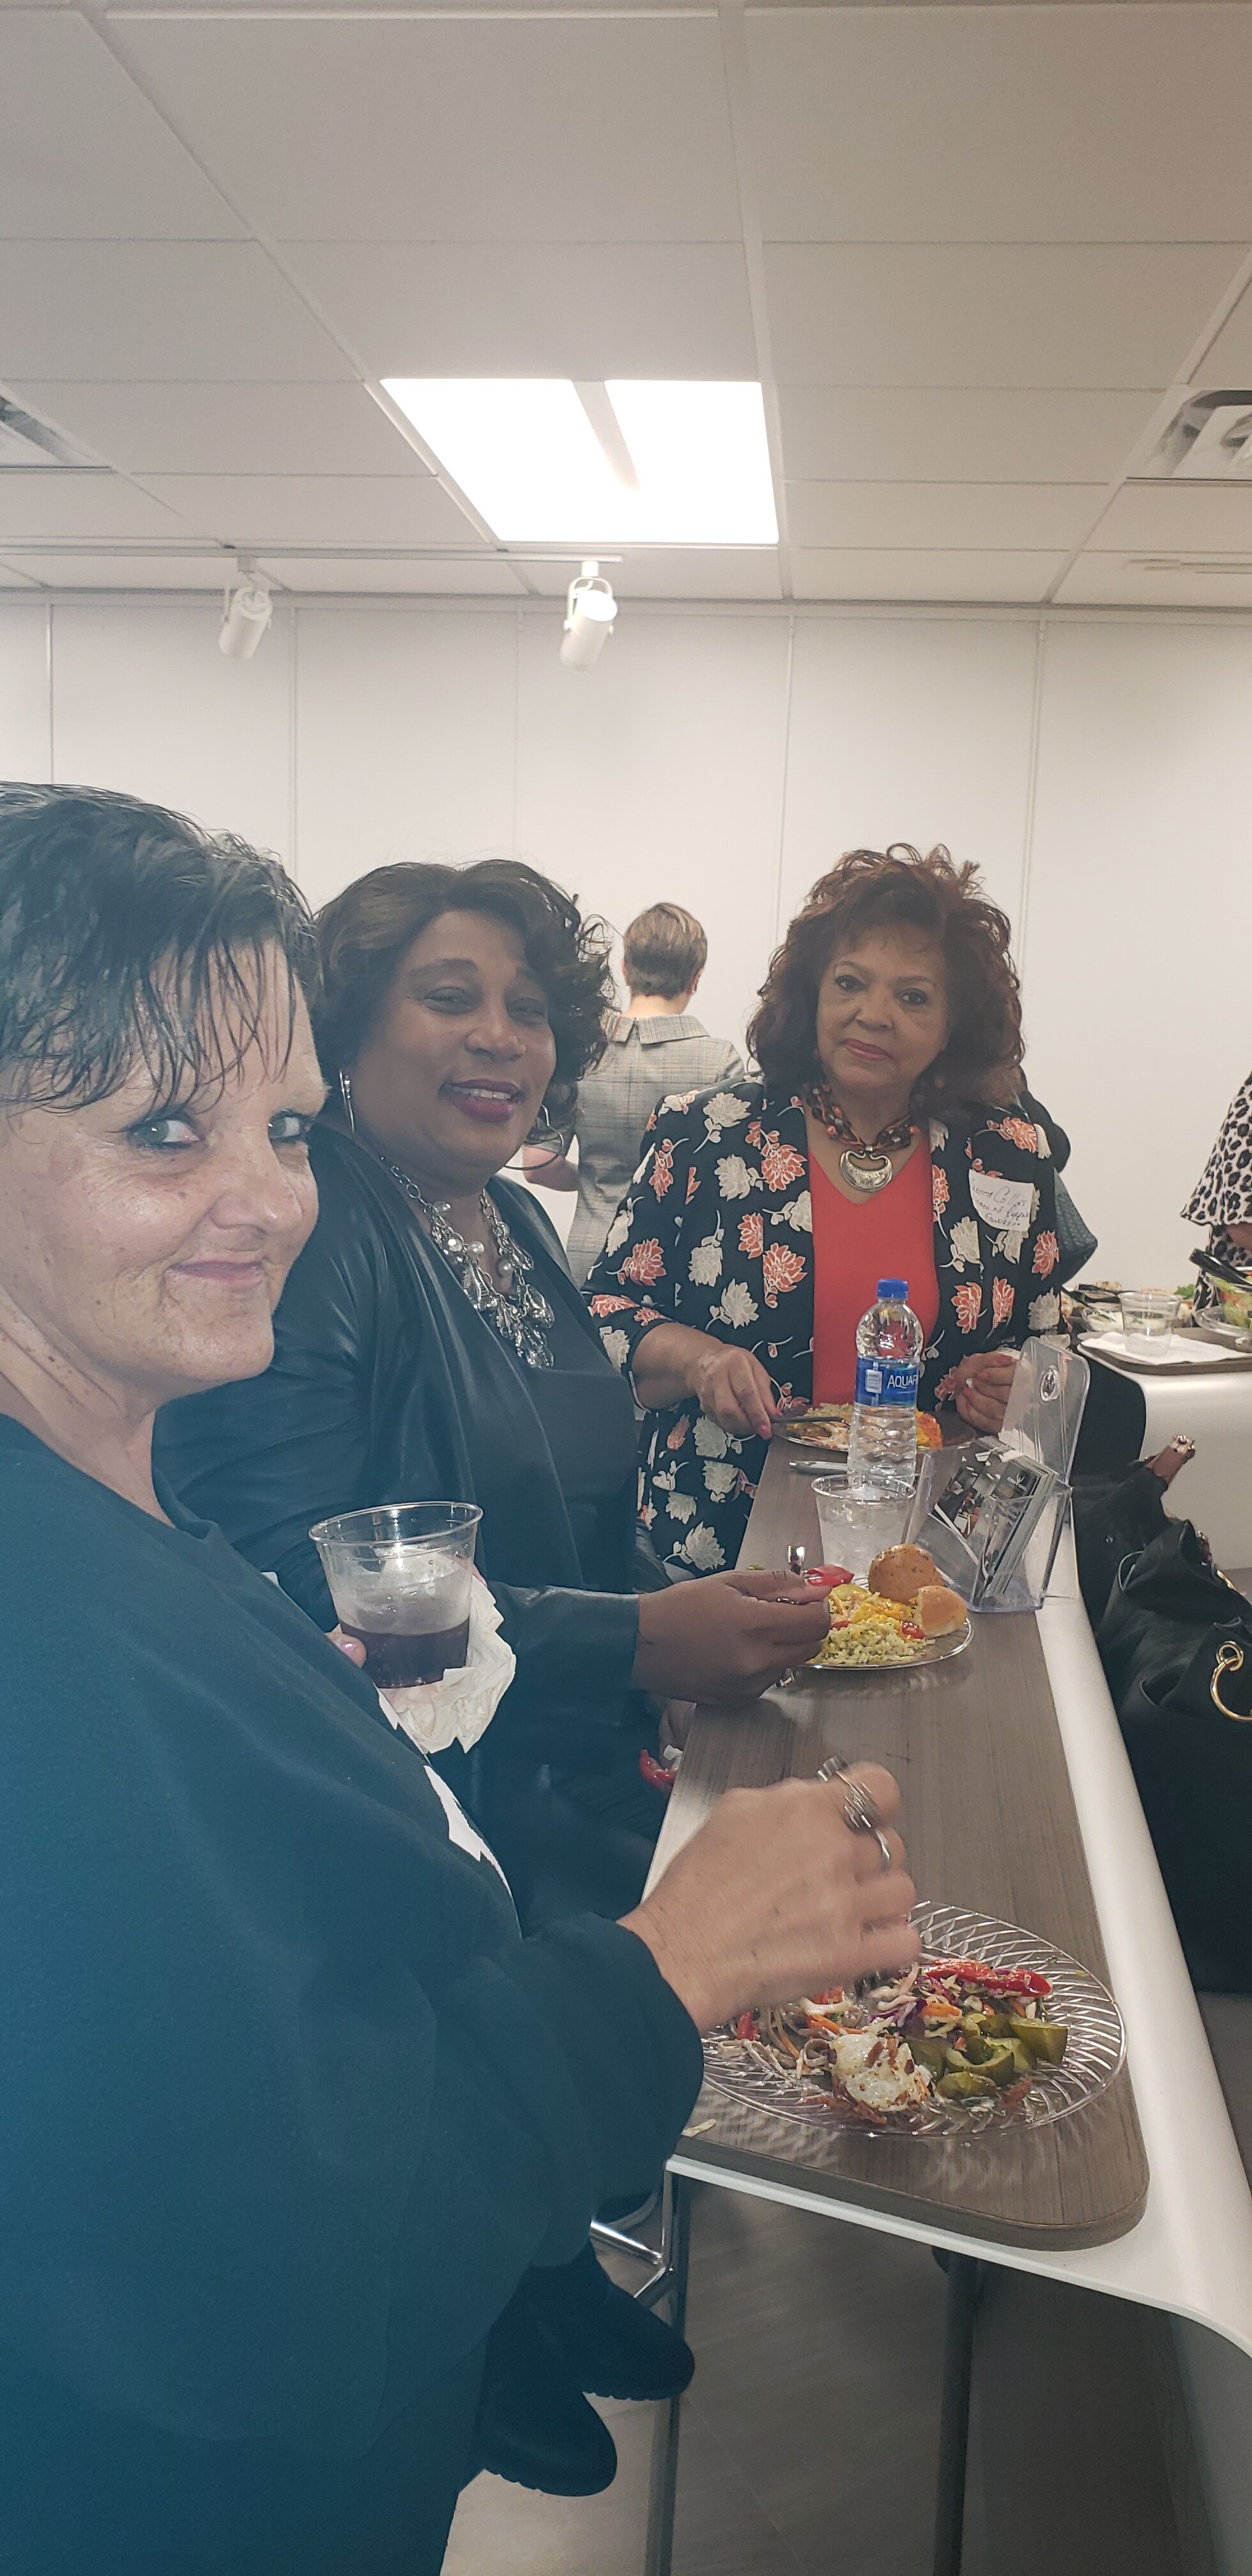 October Annual Conference 2019 - Lunch pic 1.jpg